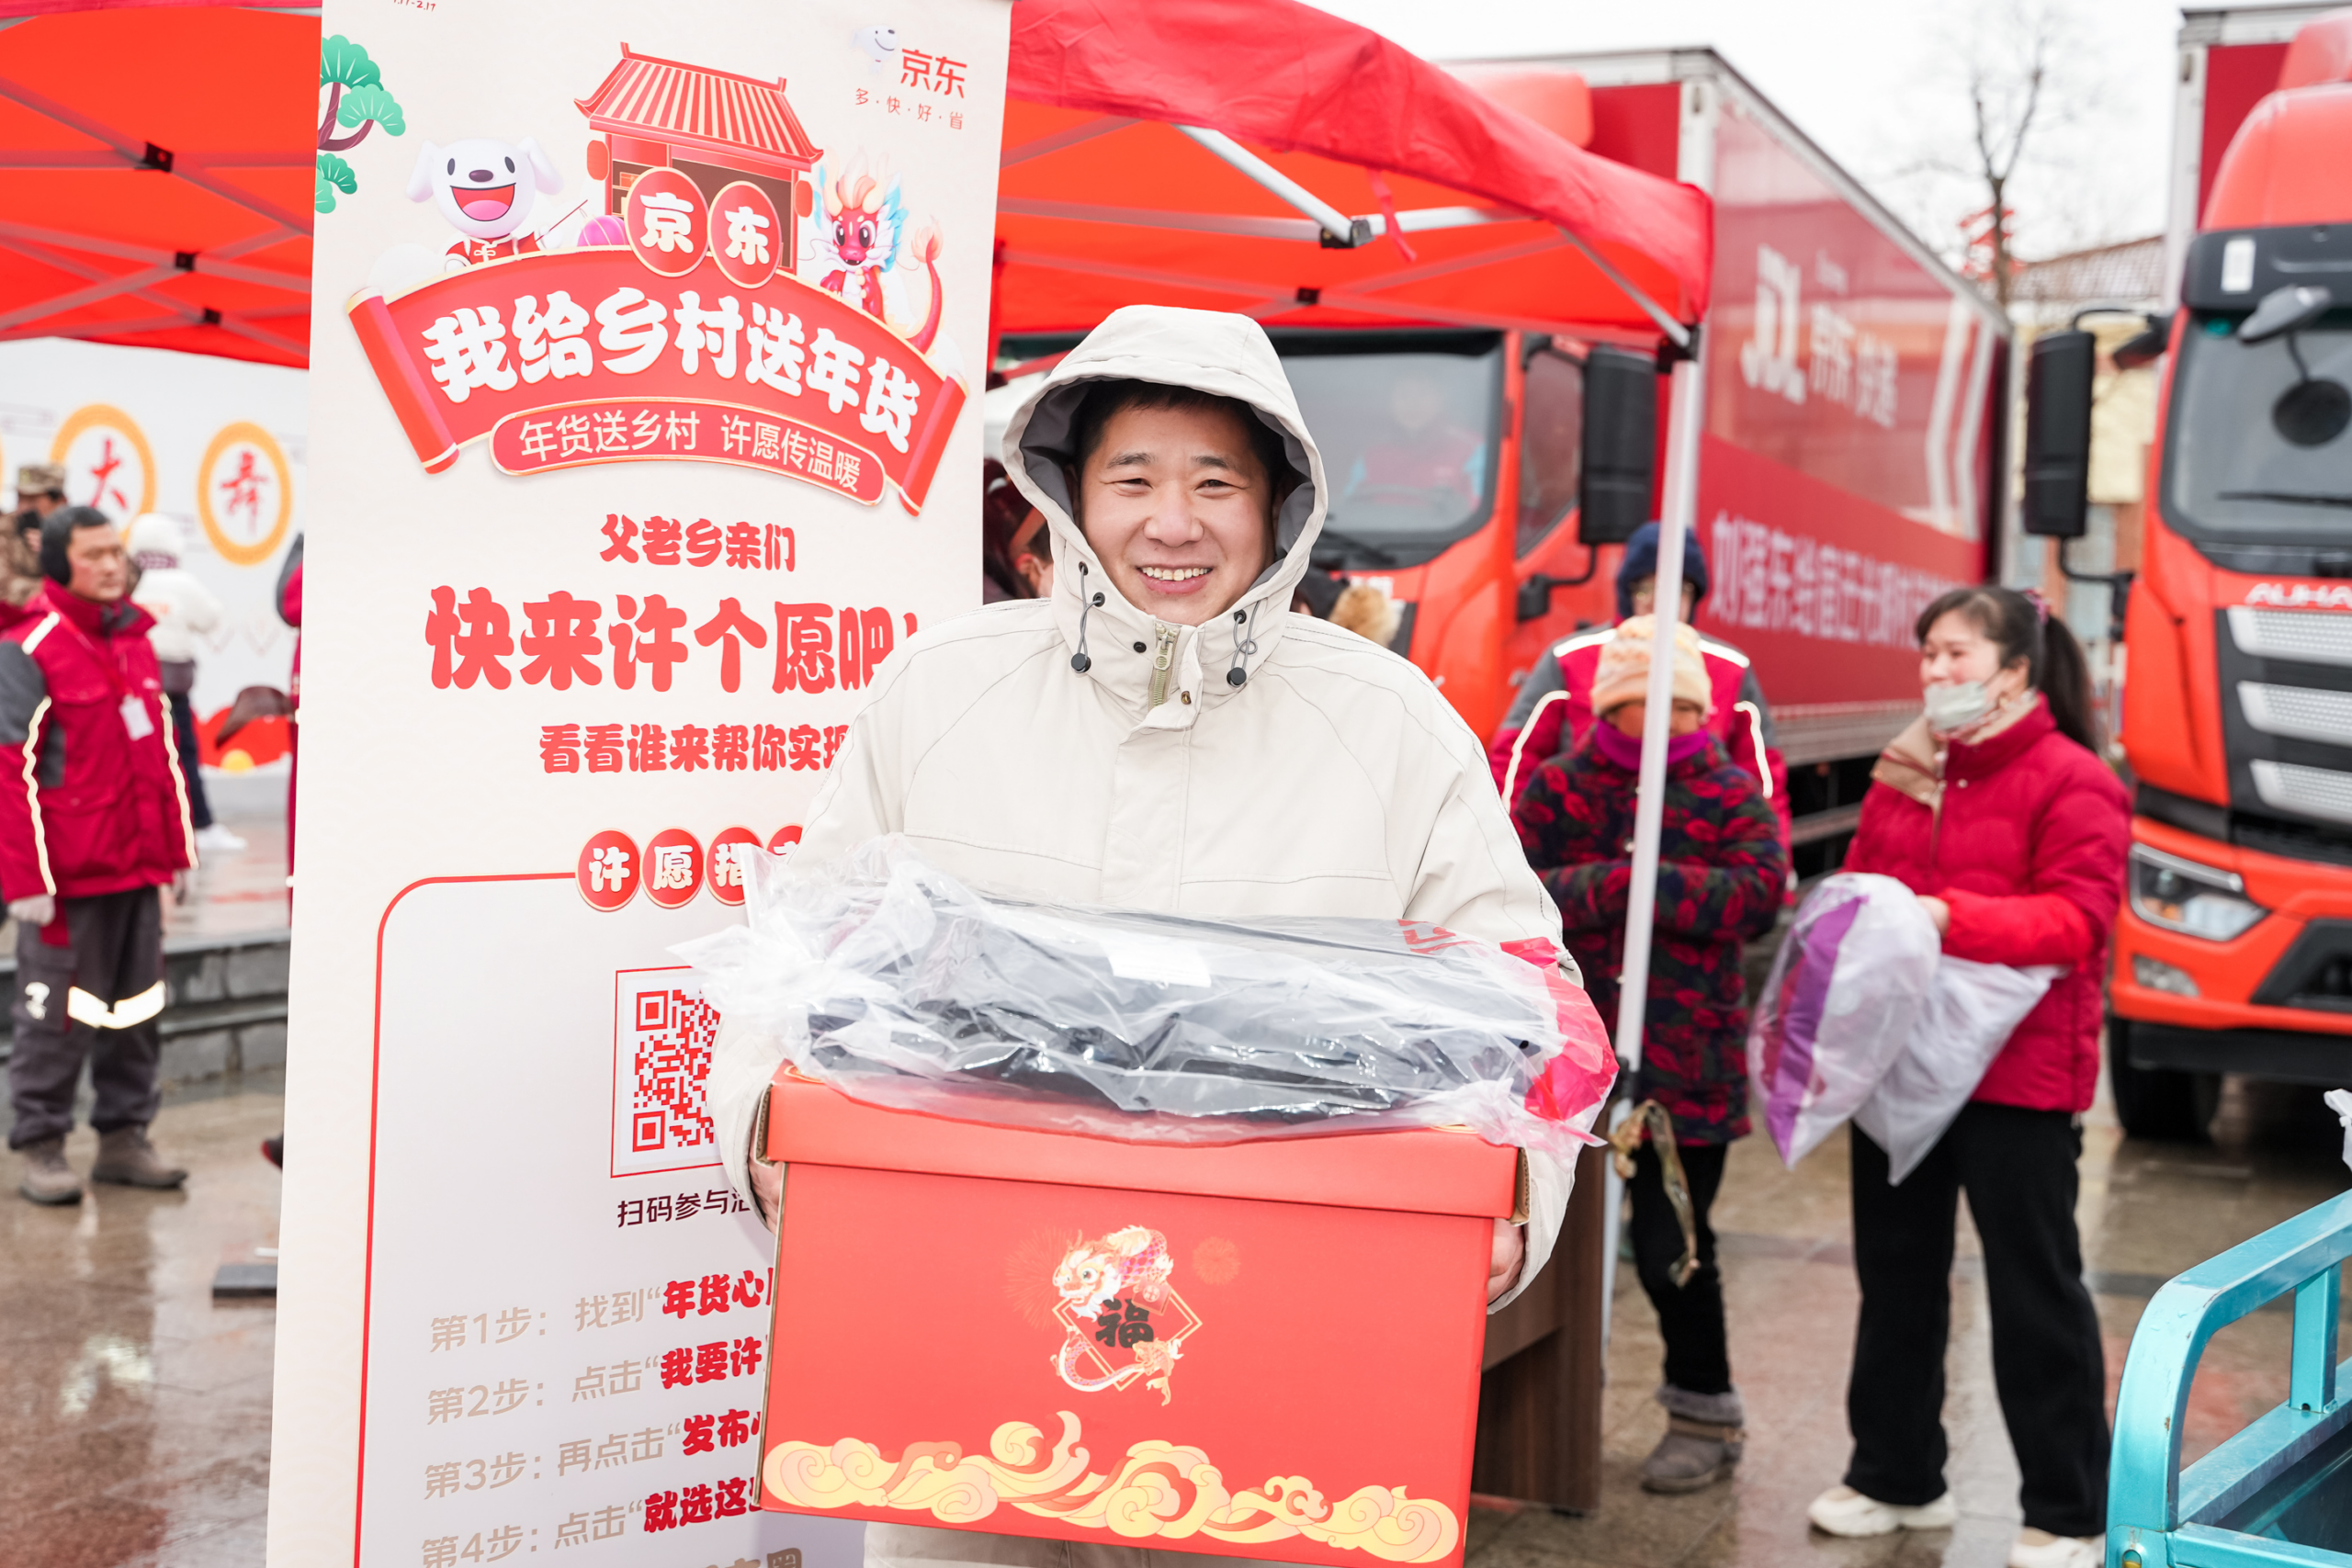 JD.com’s “Sending New Year’s Gifts to Villagers” Initiative Brightens Over 8,000 Areas in Rural China in One Week